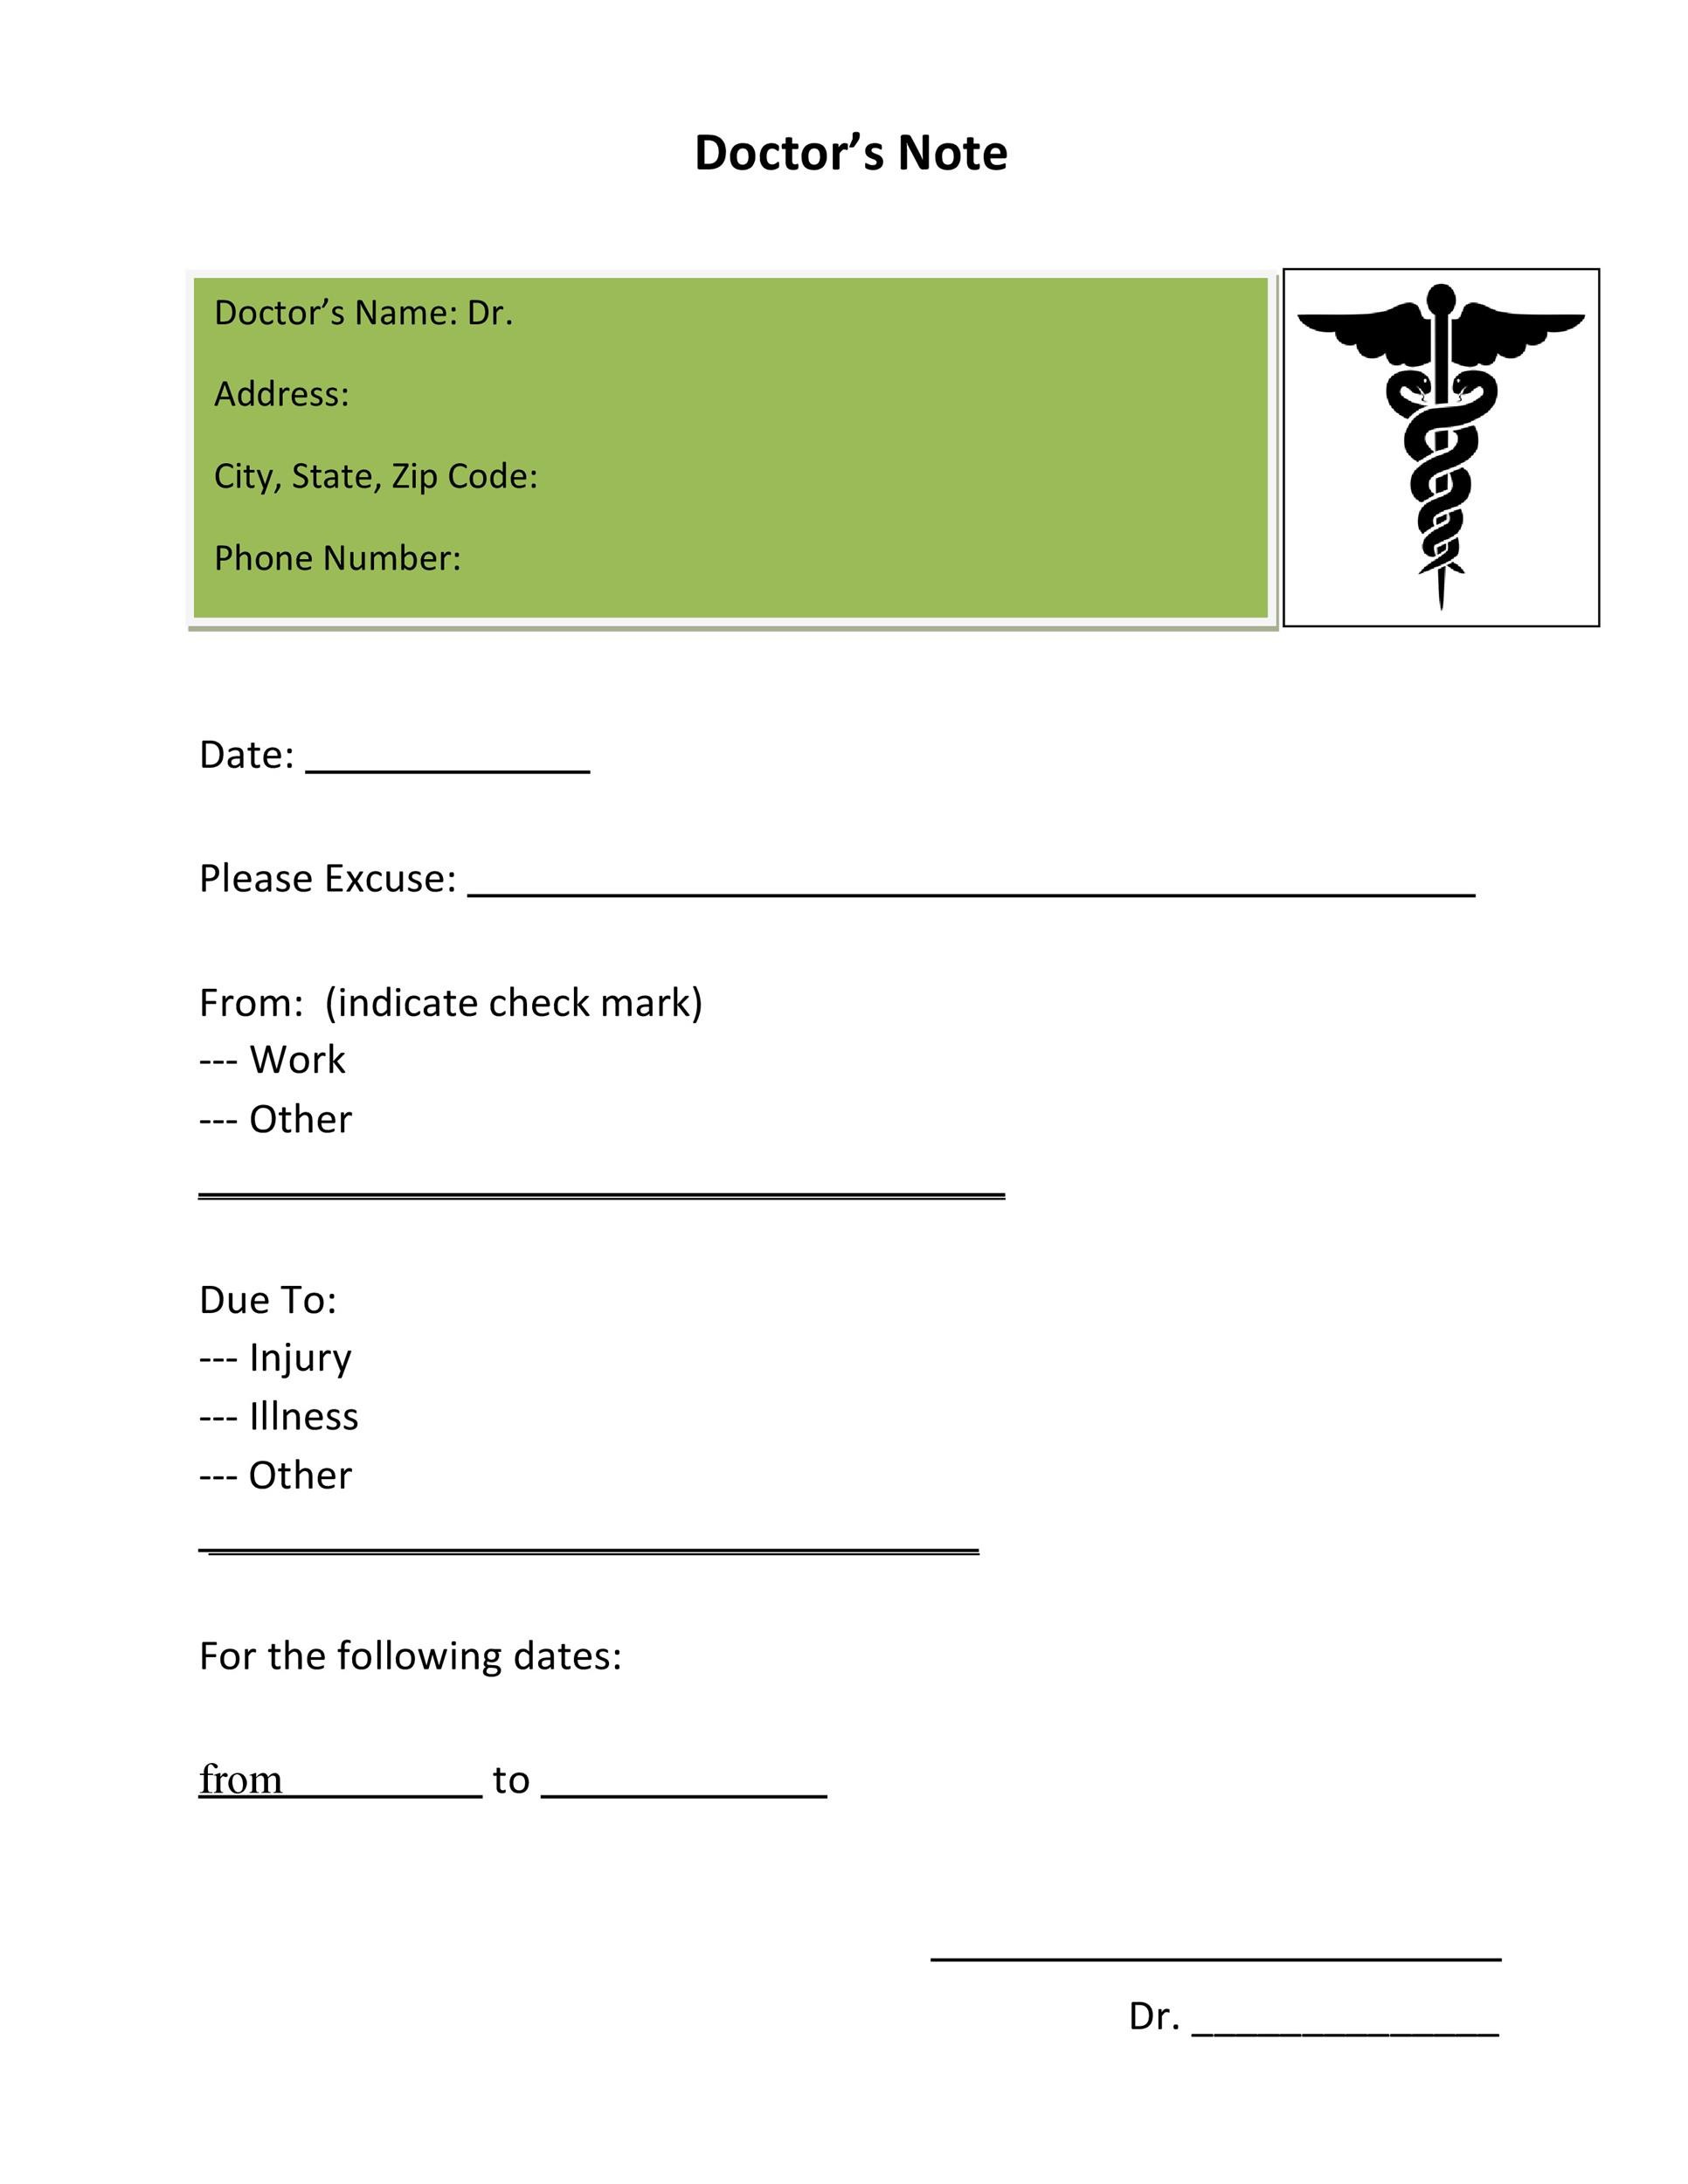 real-doctors-note-for-work-printable-template-in-pdf-word-doctors